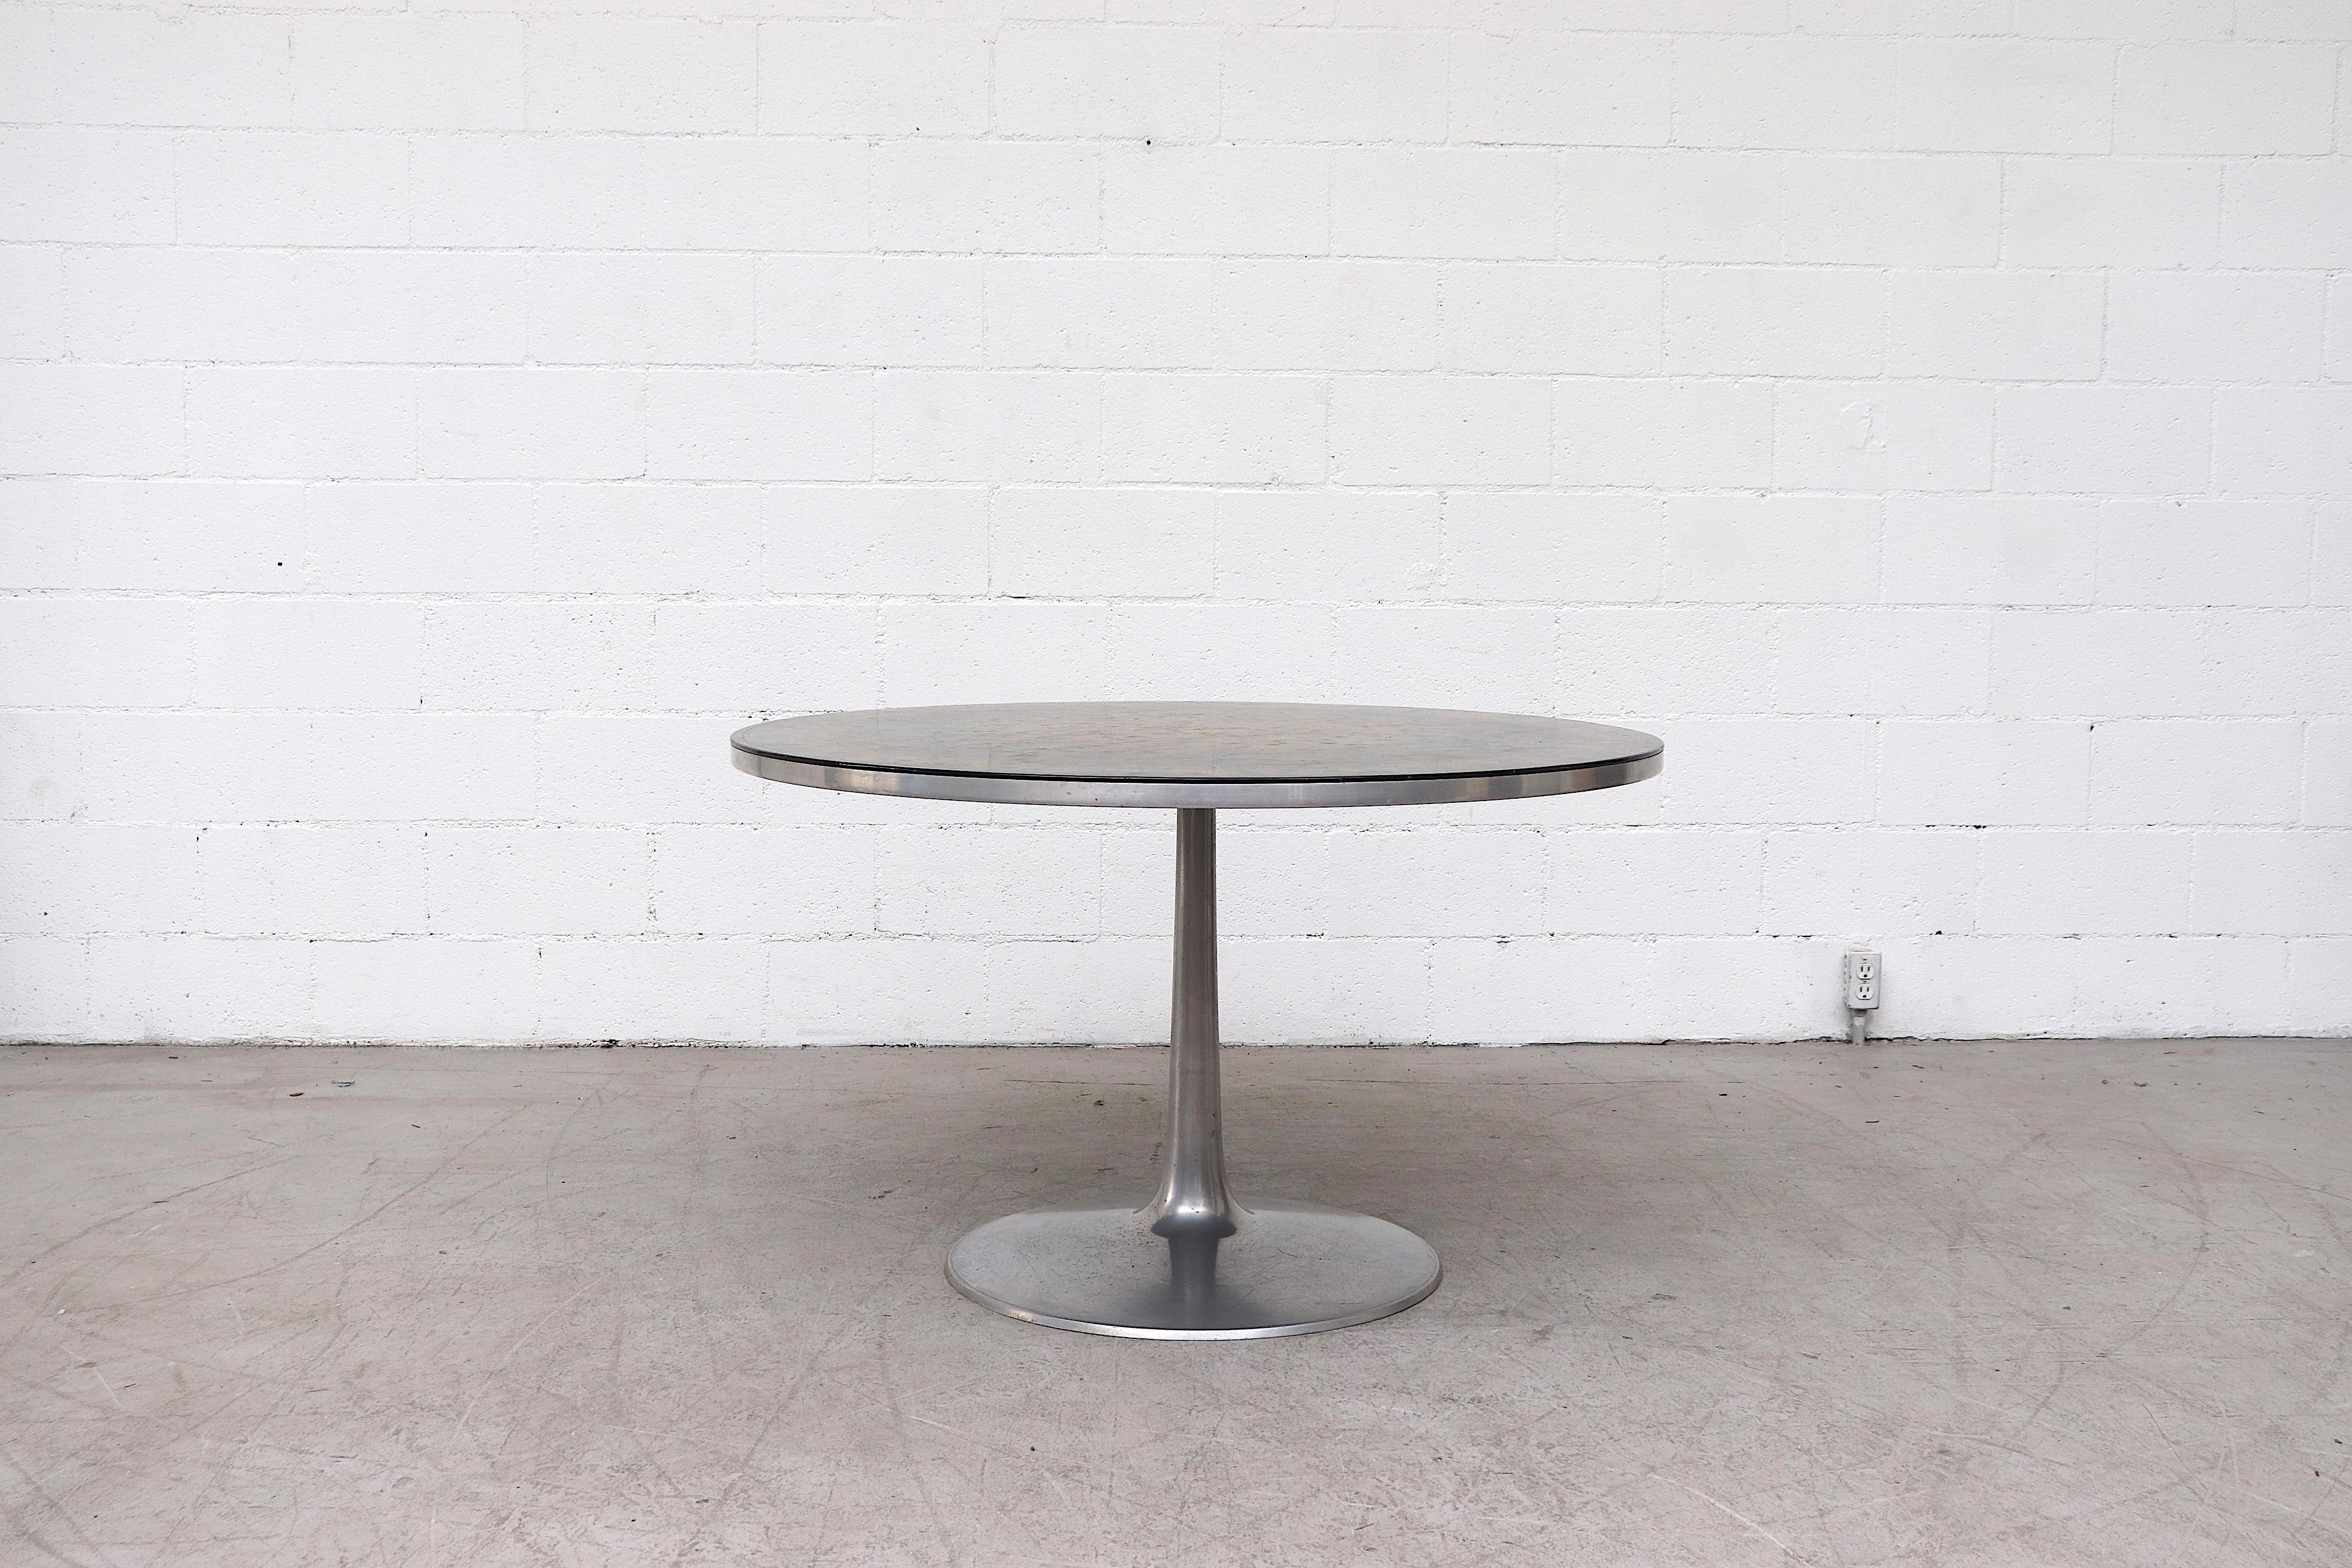 Impressive Poul Cadovius dining or center table with striking ornate surface with an aluminum pedestal base. In original condition with some wear and visible scratching consistent with use and age. Other sizes (LU922418398332, LU922418398202) and